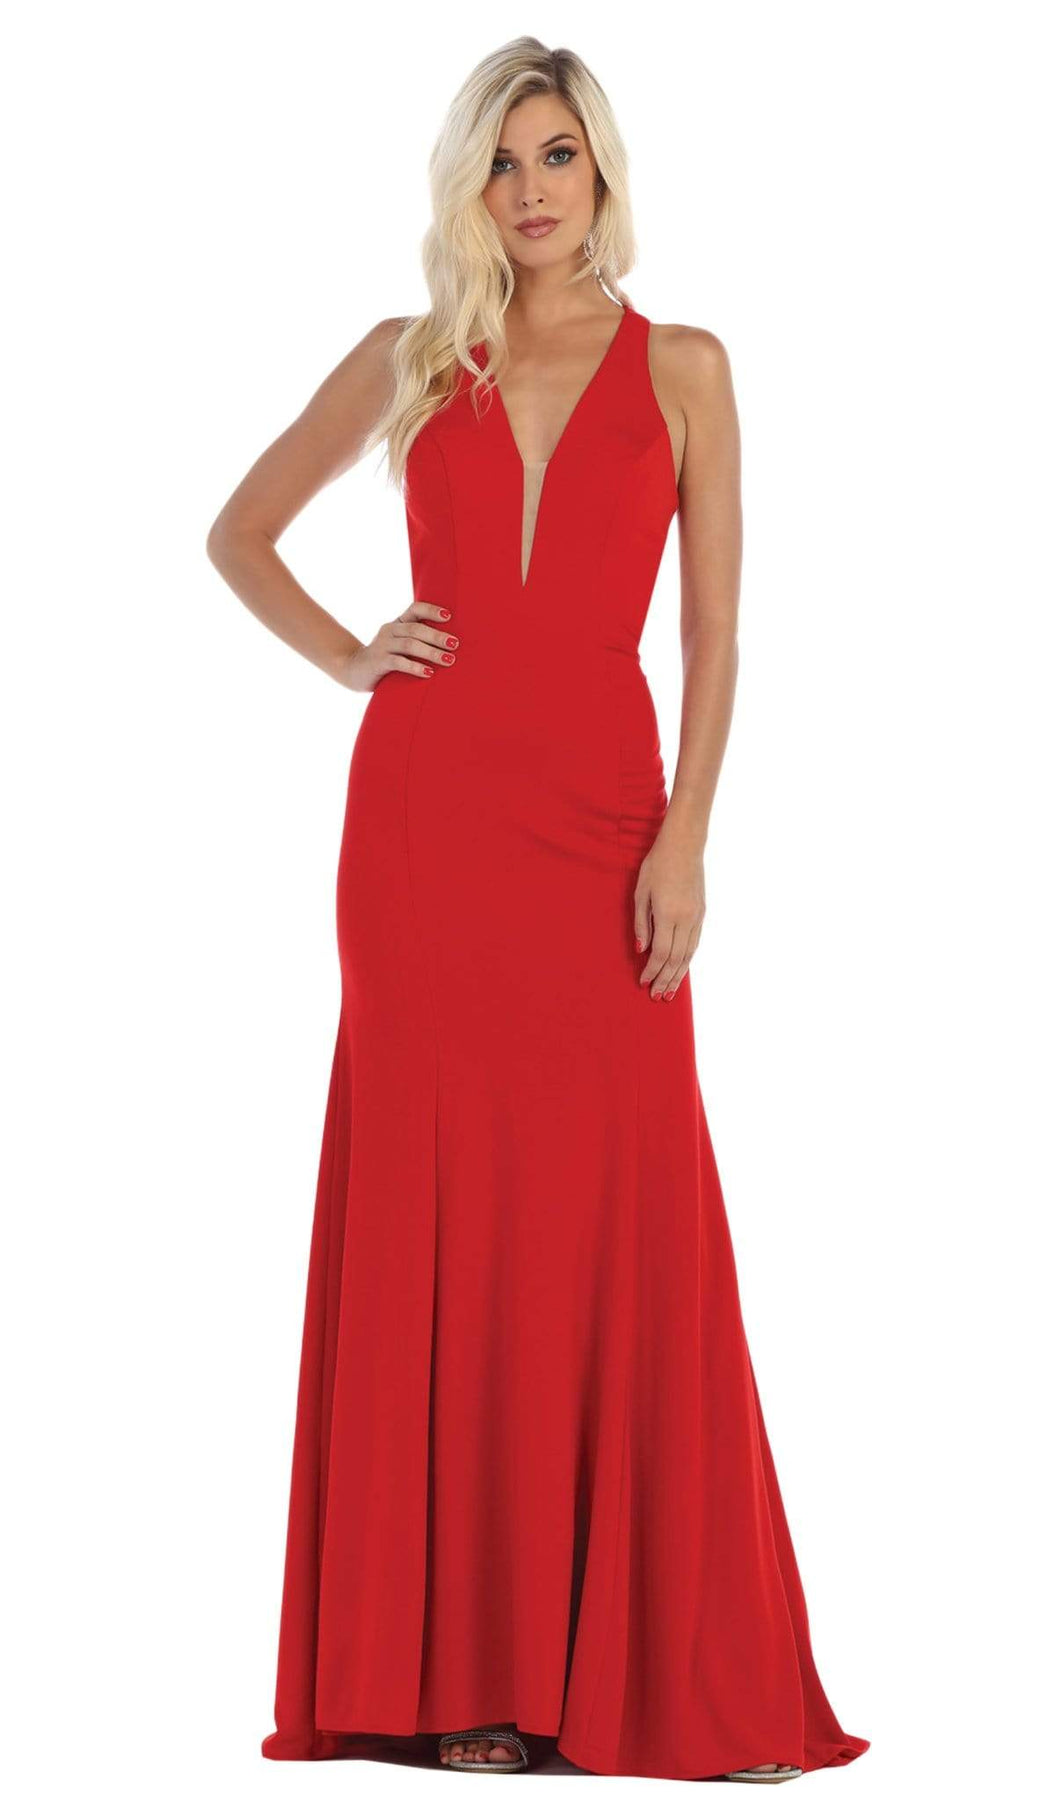 May Queen - MQ1636 Halter Crisscross Straps Open Back Mermaid Gown Special Occasion Dress 2 / Red